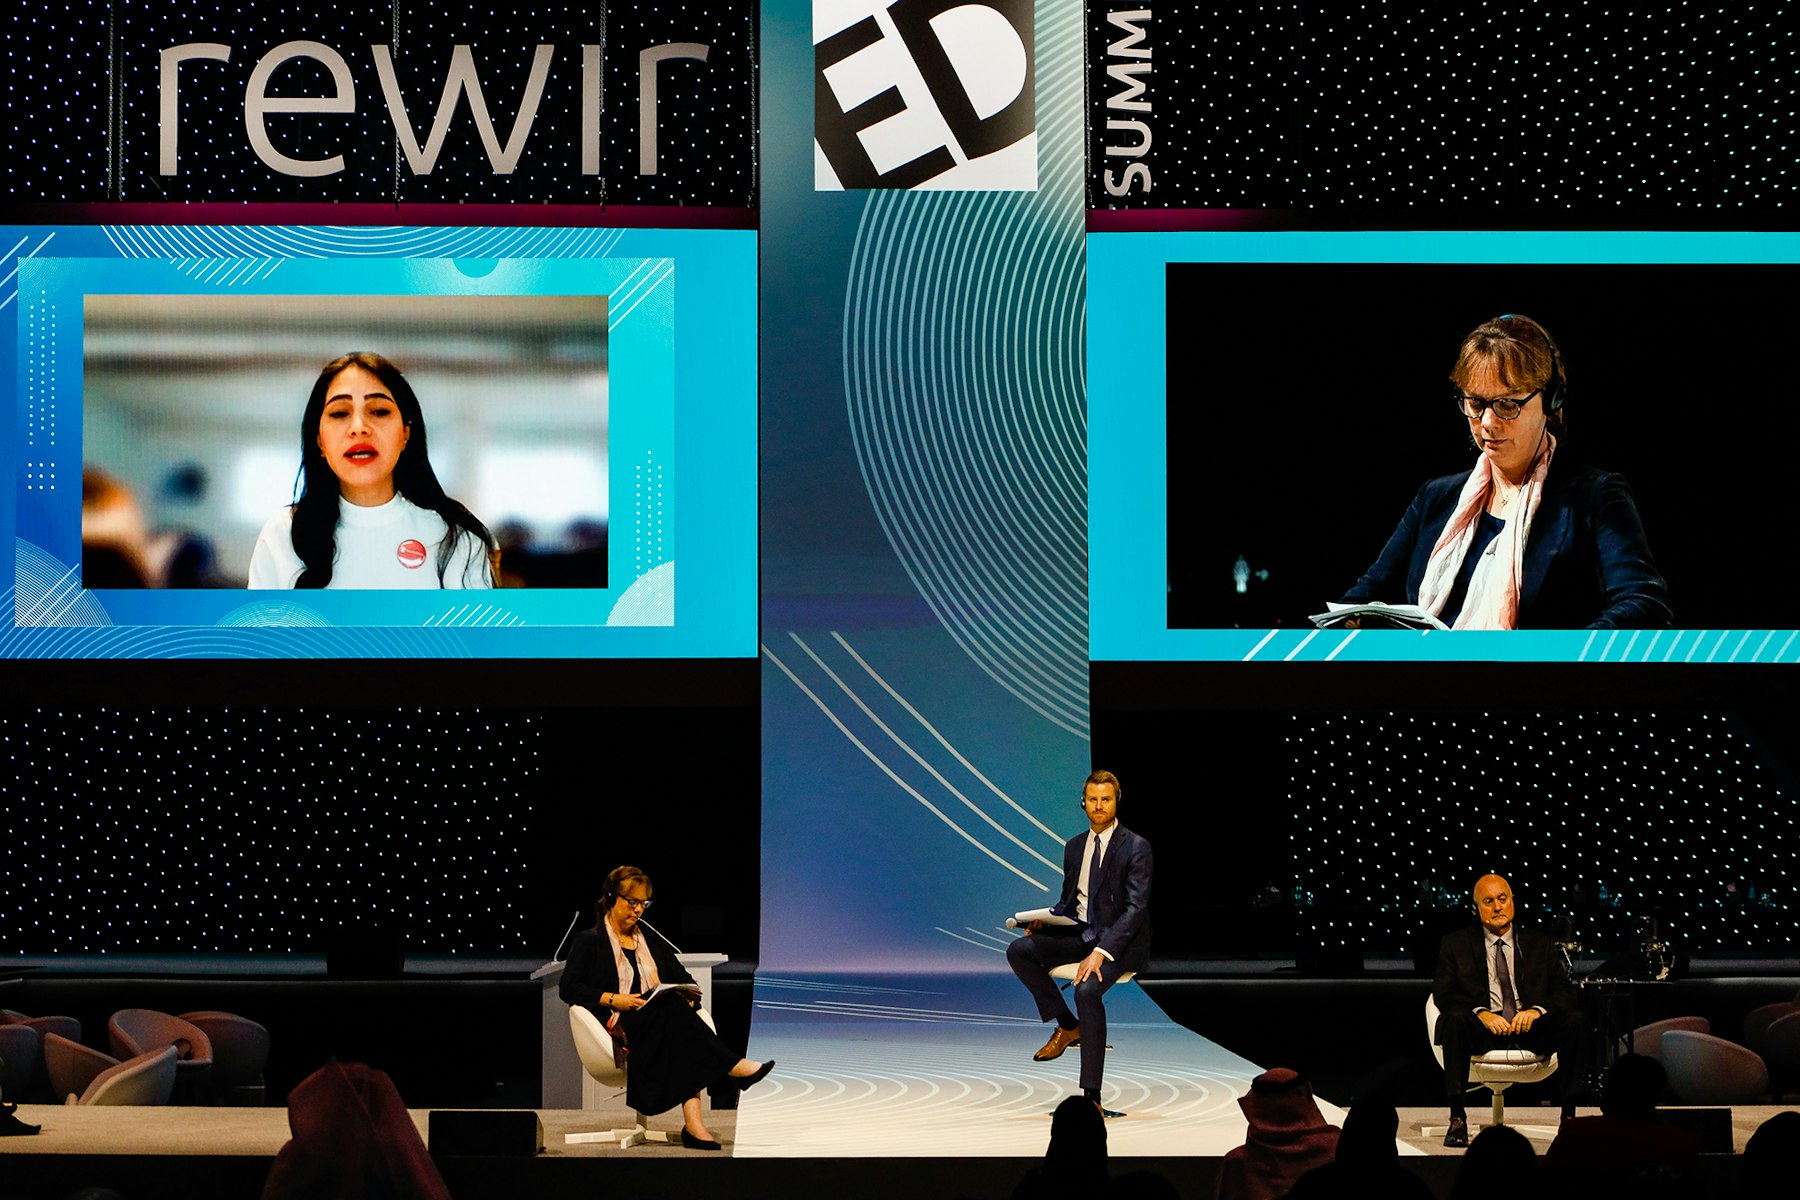 The Schools2030 official global launch at the RewirEd Summit, at a panel that brought teachers into conversation with global leaders. AKDN